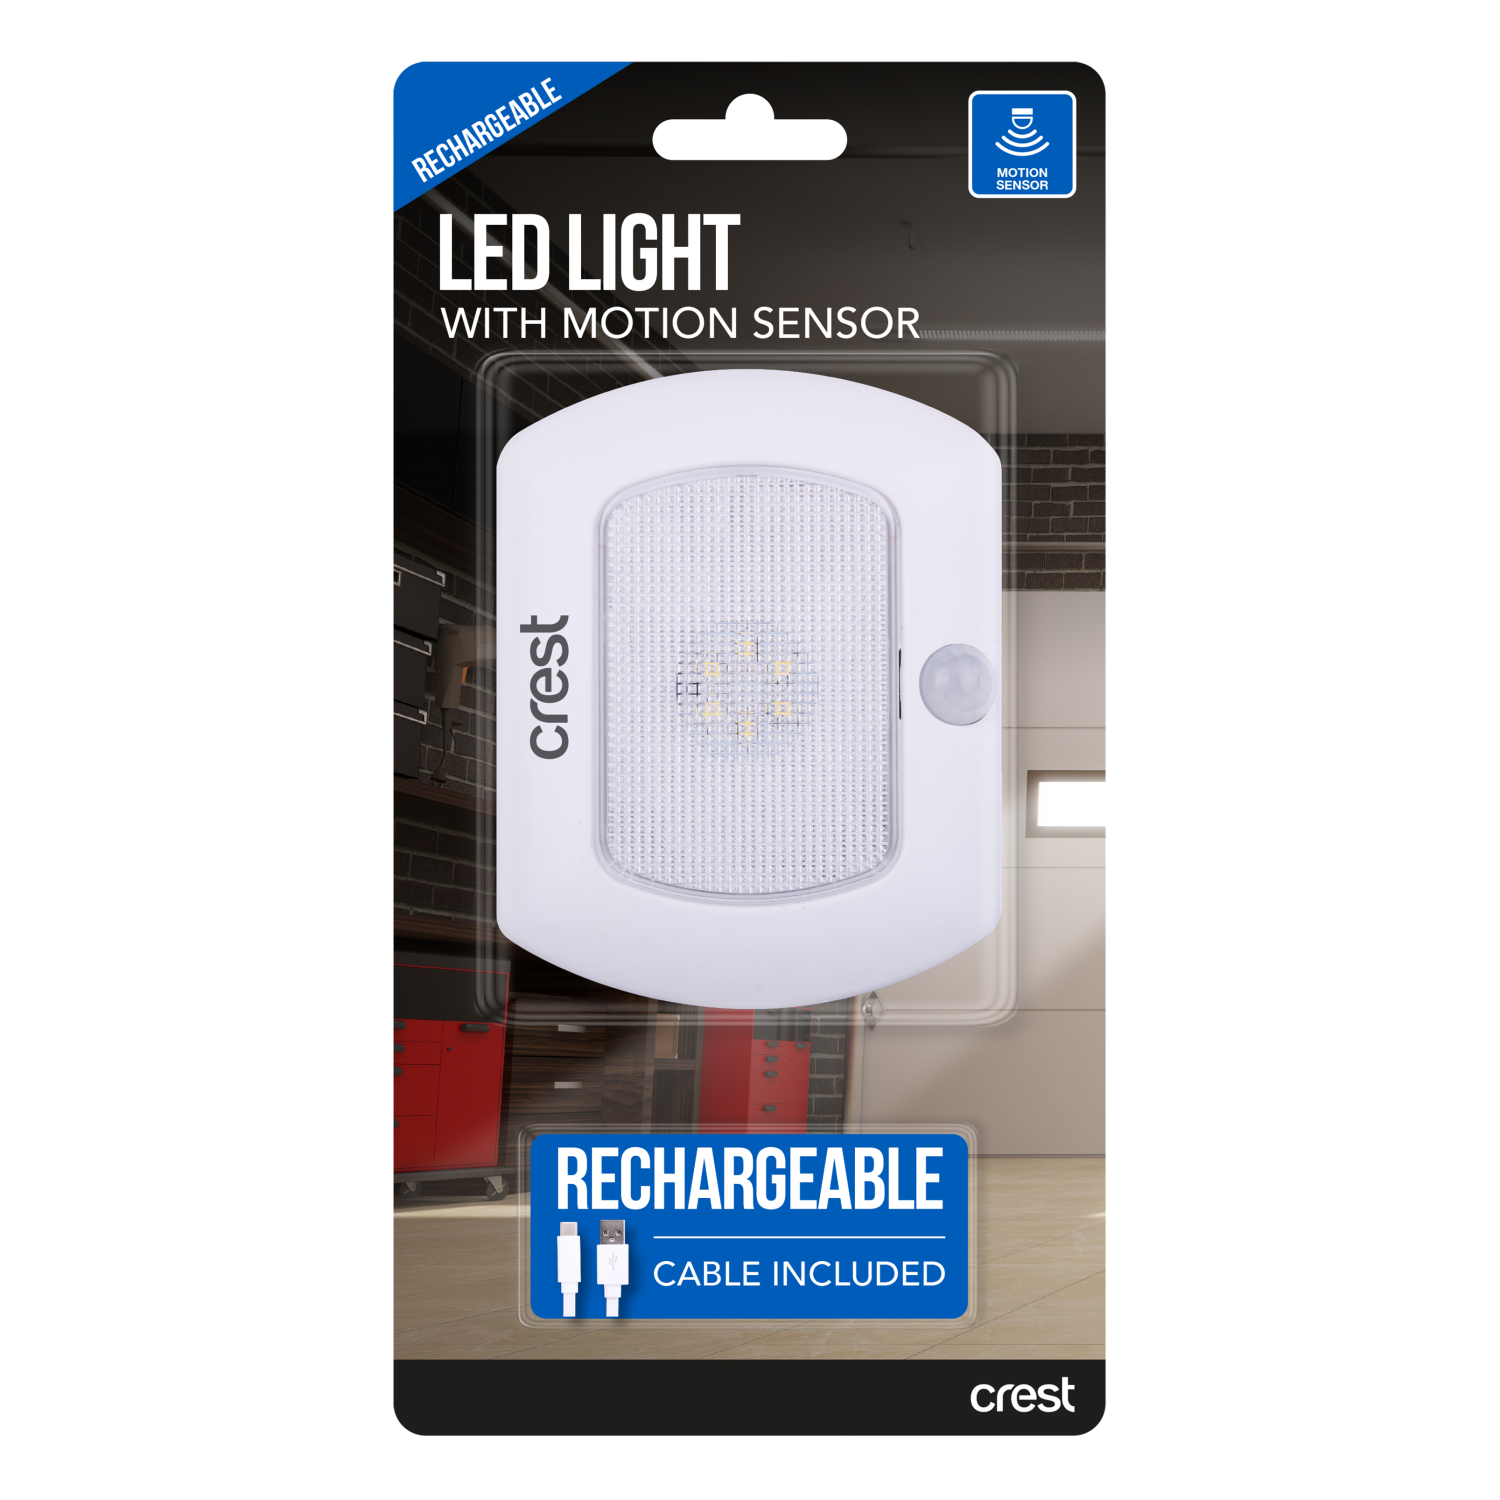 Rechargeable LED Light Compact with Motion Sensor